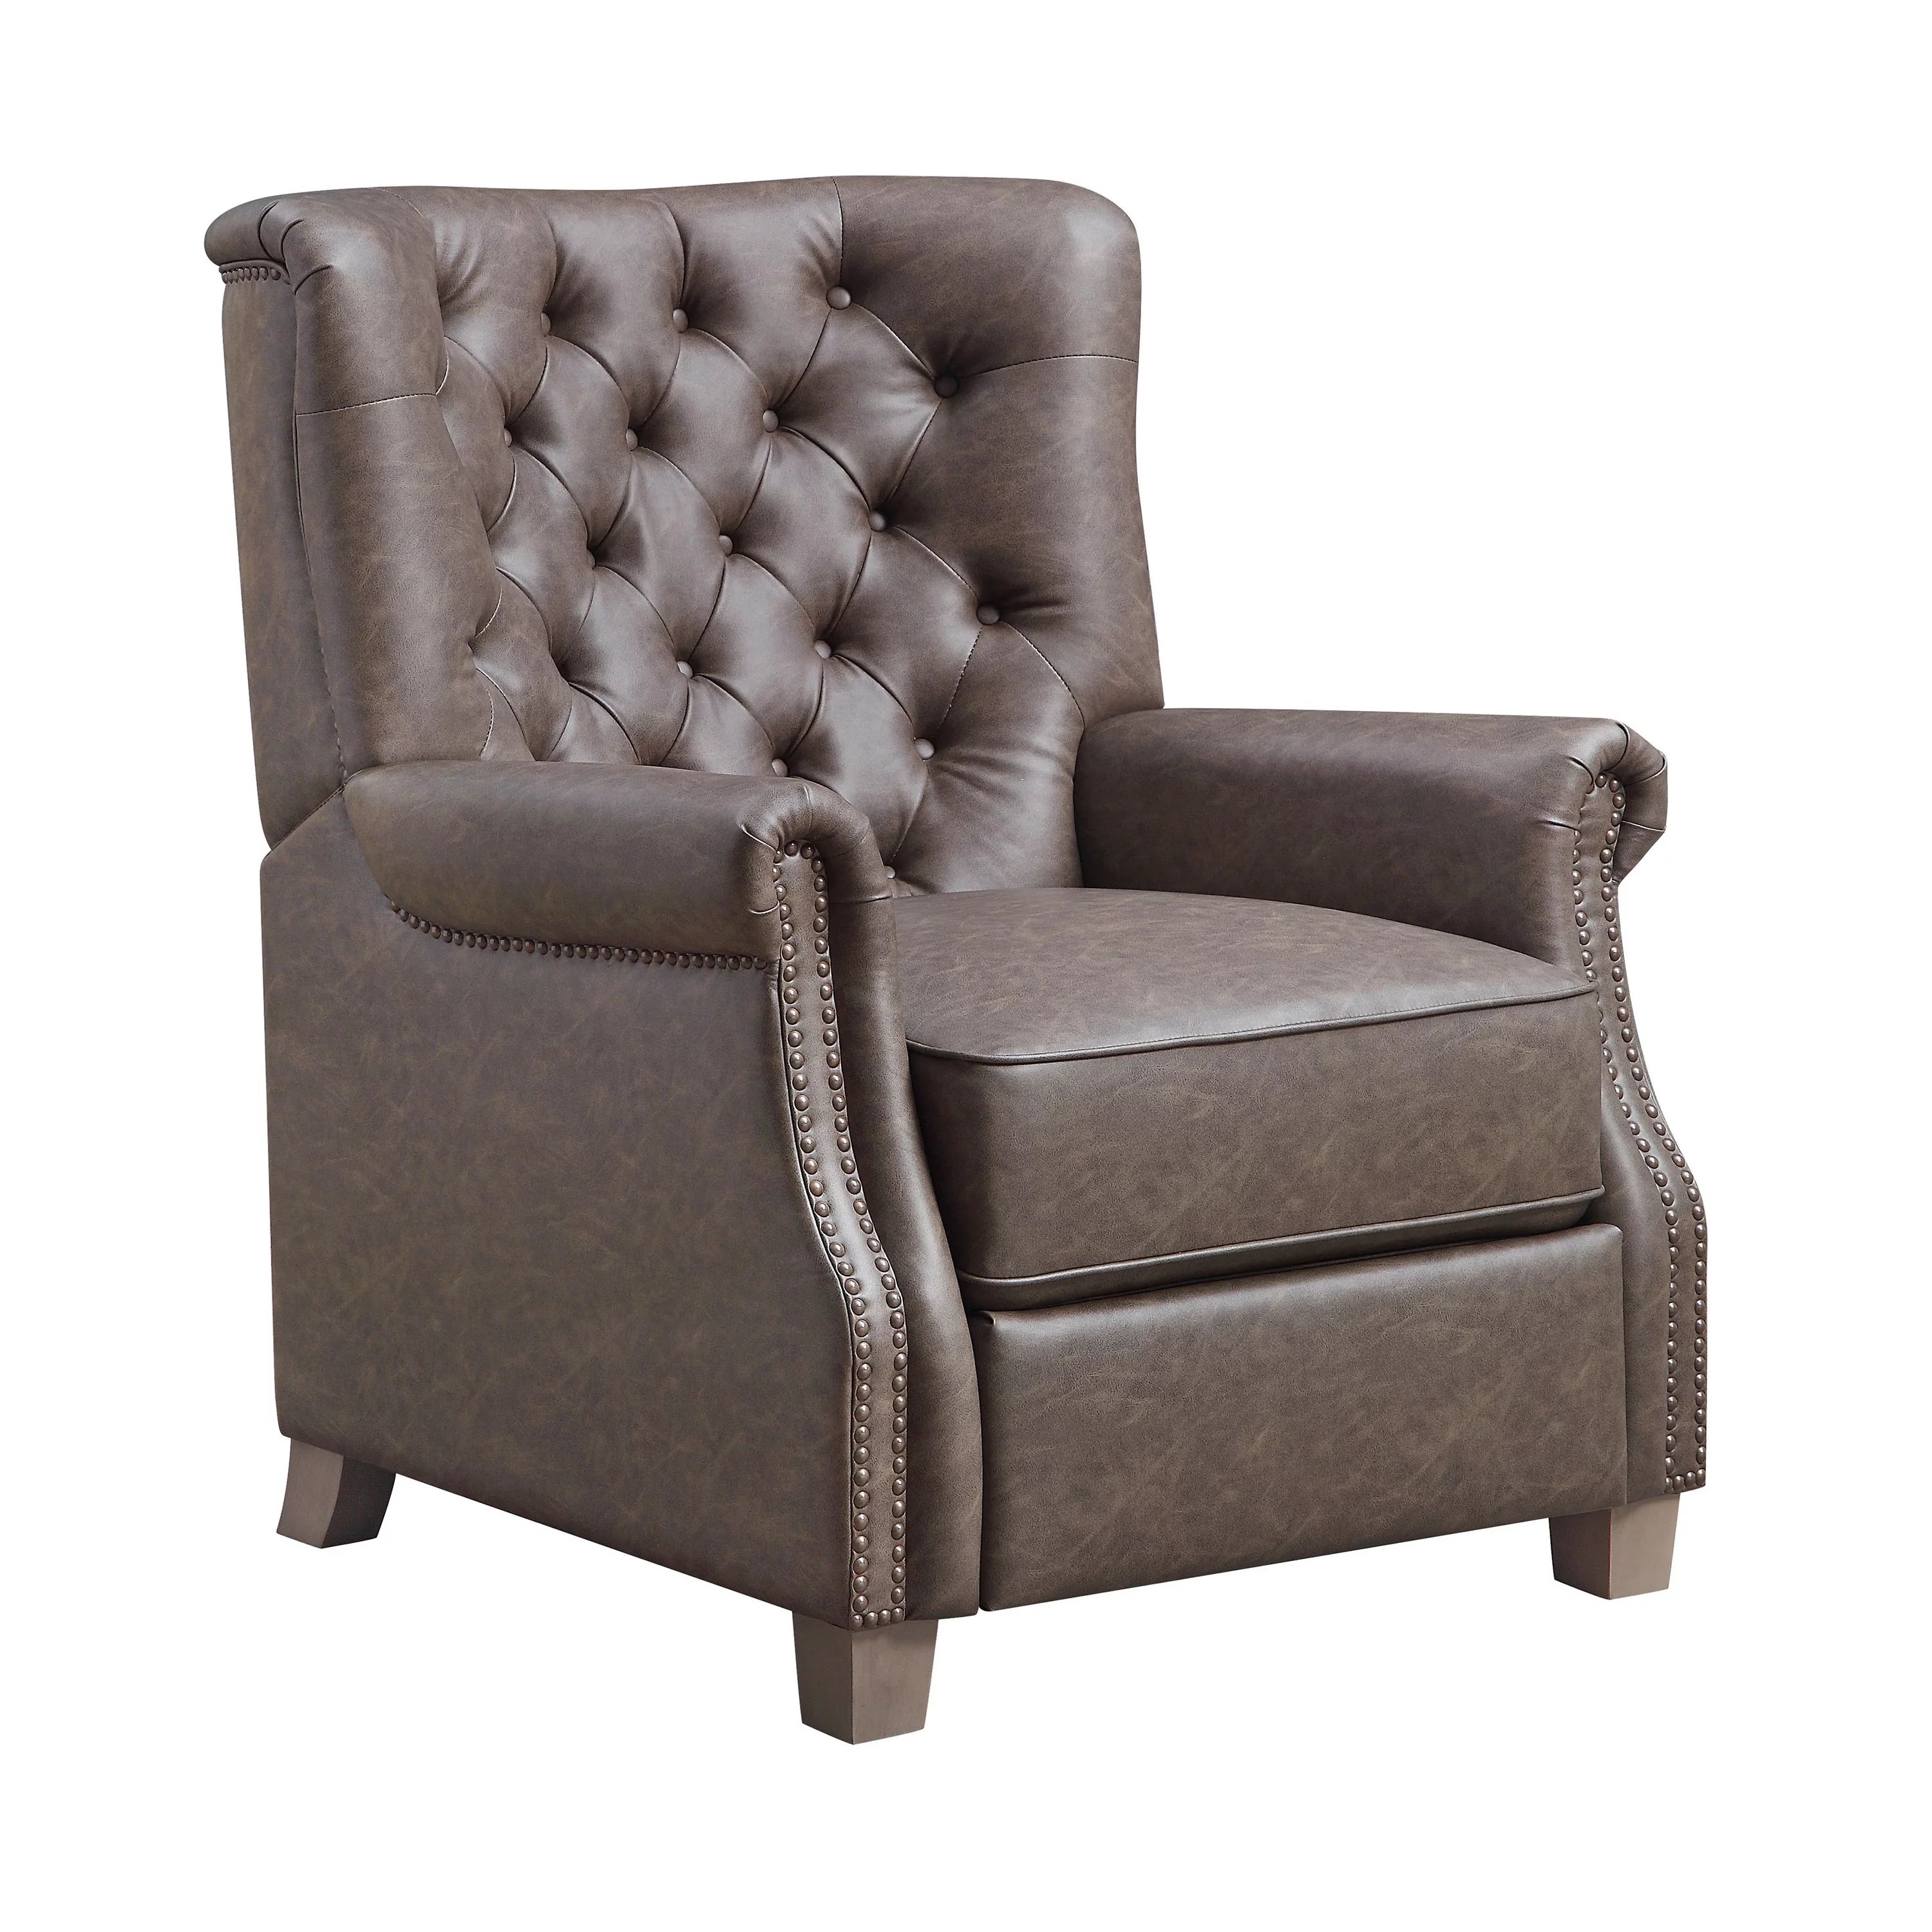 Better Homes and Garden Tufted Push Back Recliner, Brown Faux Leather | Walmart (US)